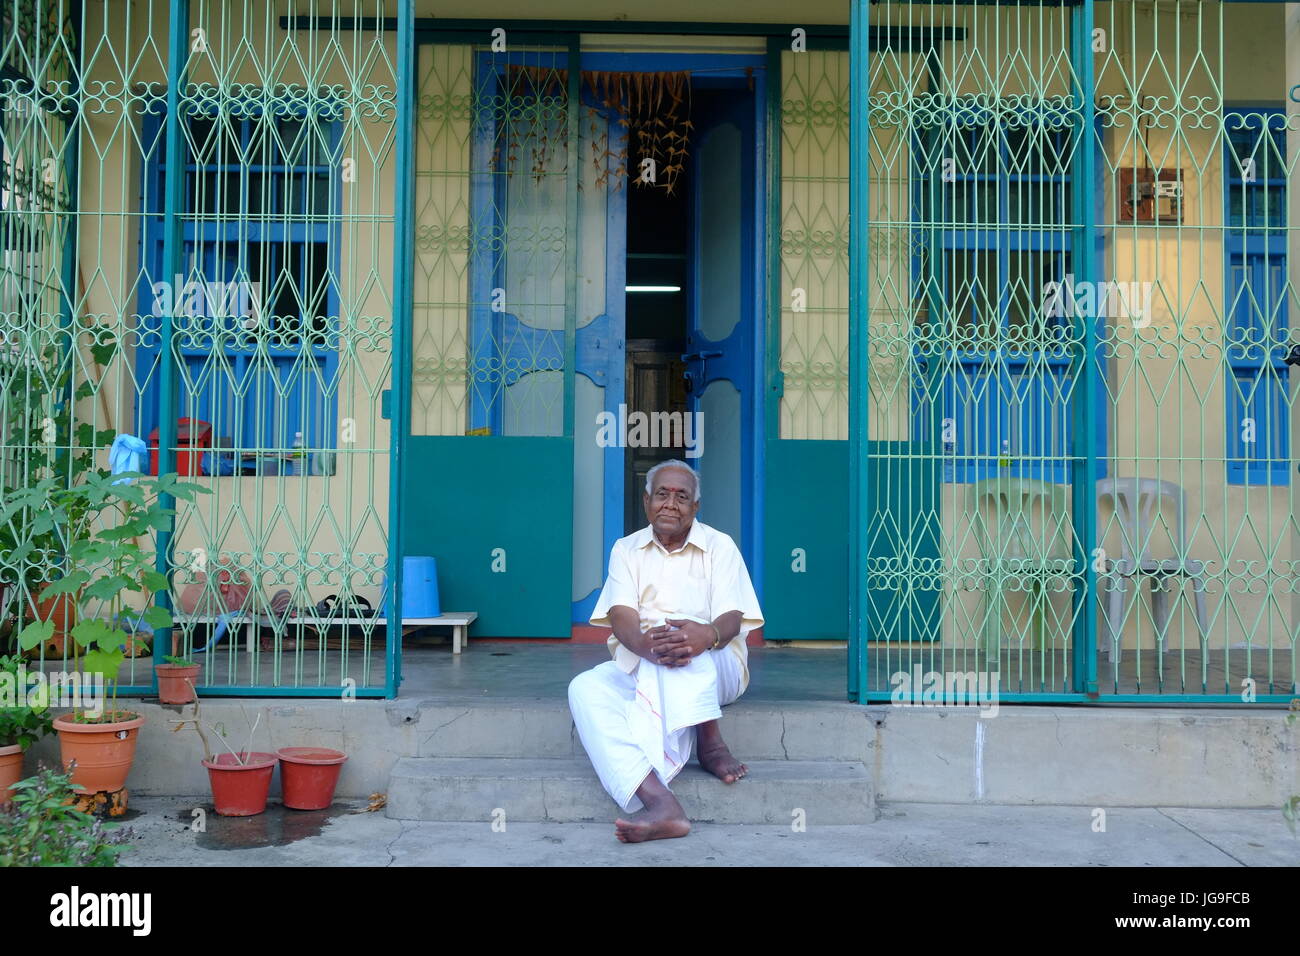 An Indian man sits outside an old building in Little India,Georgetown, Penang, Malaysia Stock Photo